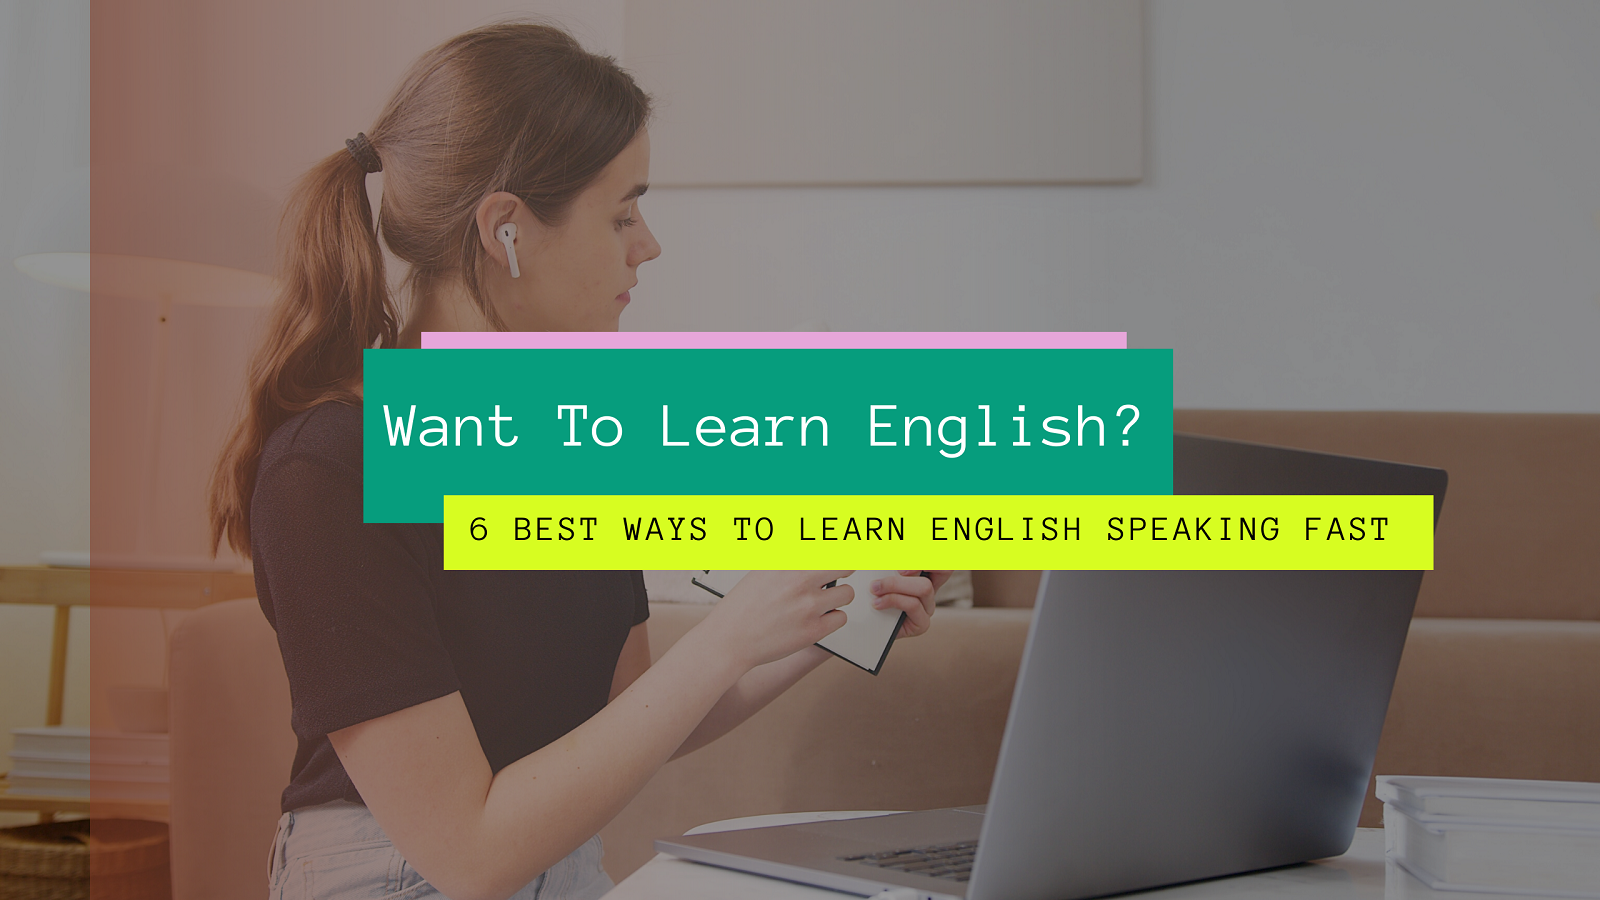 Want To Learn English? 6 Best Ways To Learn English Speaking Fast